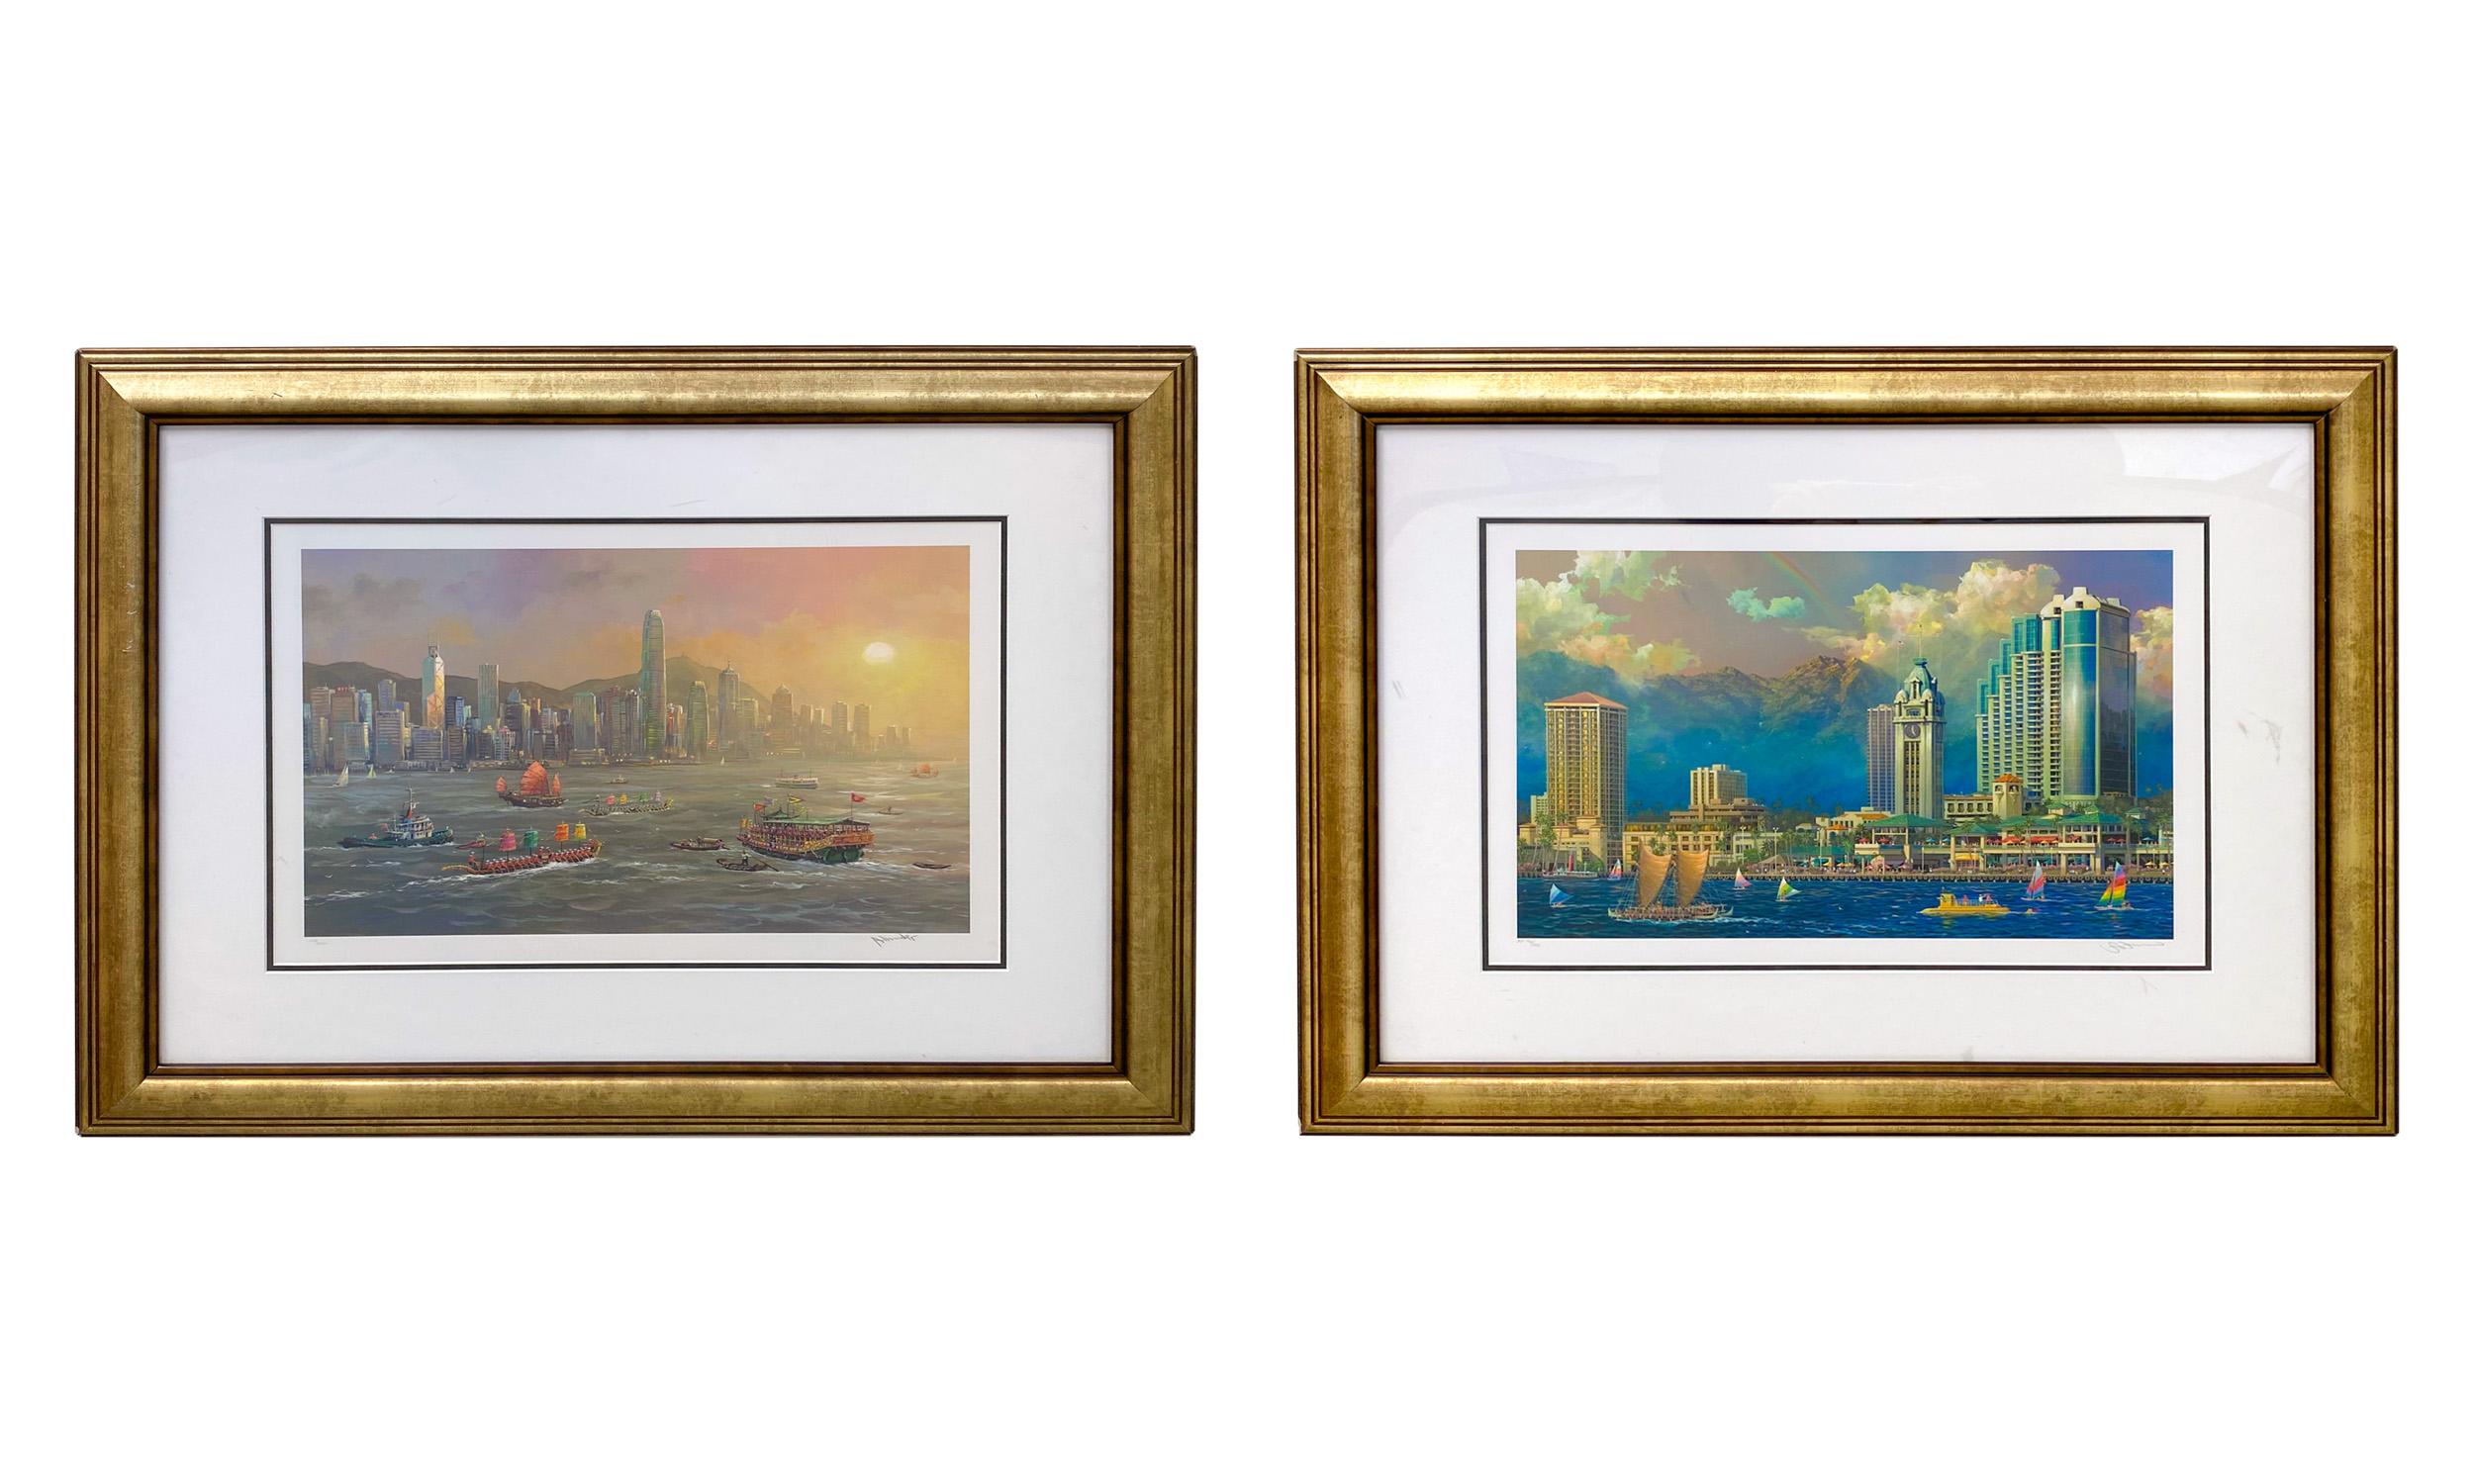 A pair of Alexander Chen Stereolithography signed and numbered framed prints. One print is titled "Aloha Tower" and the other "Hong King Evening".

Each print is finely framed in custom matted frame. 

Dimensions: 23.5" H x 24" W